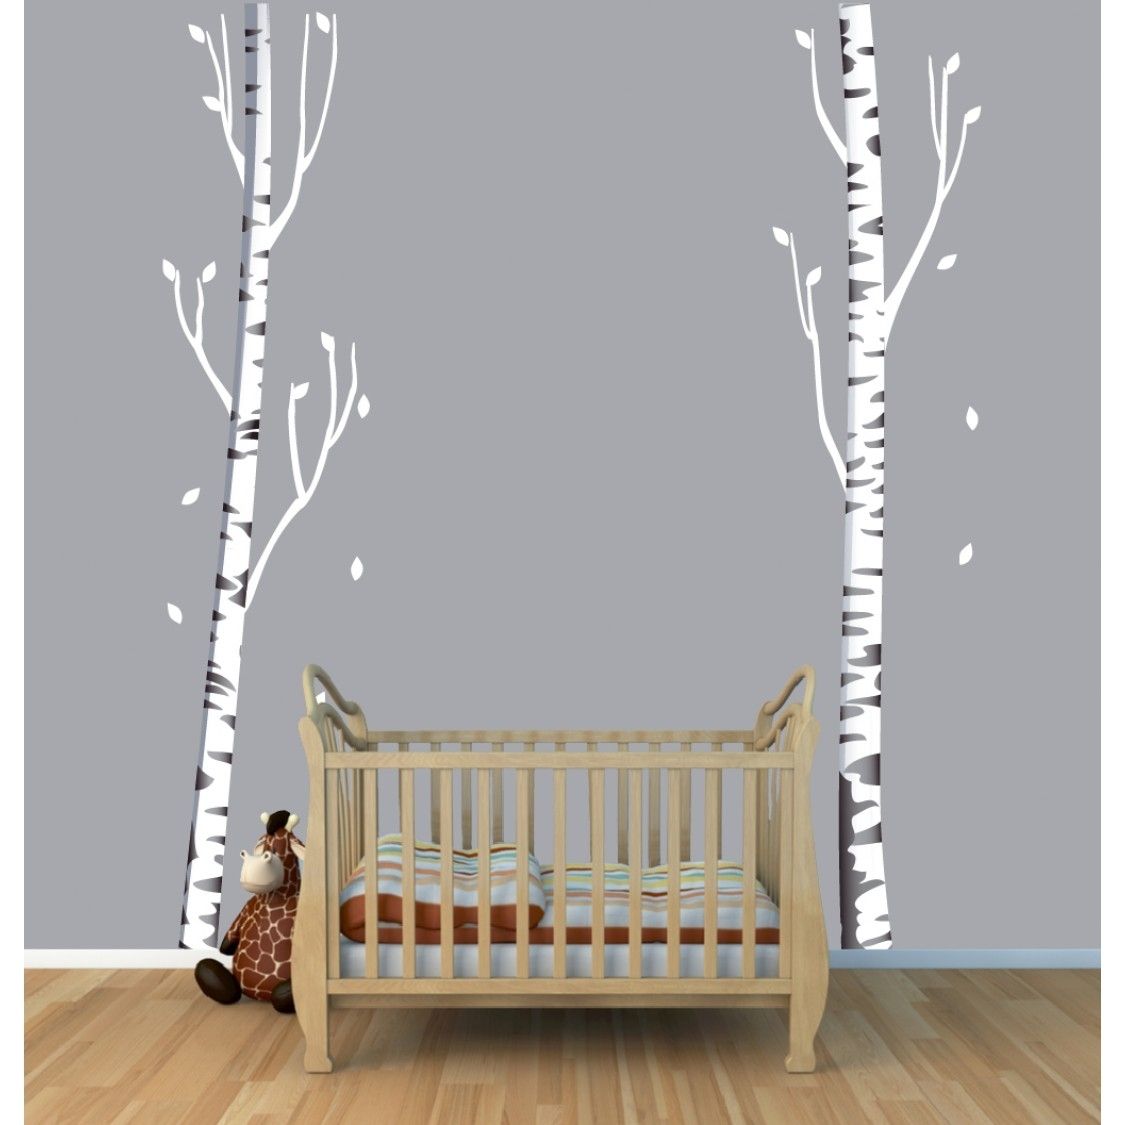 Custom Birch Tree Wall Art And Tree Wall Decor For Play Rooms Throughout Birch Tree Wall Art (View 18 of 20)